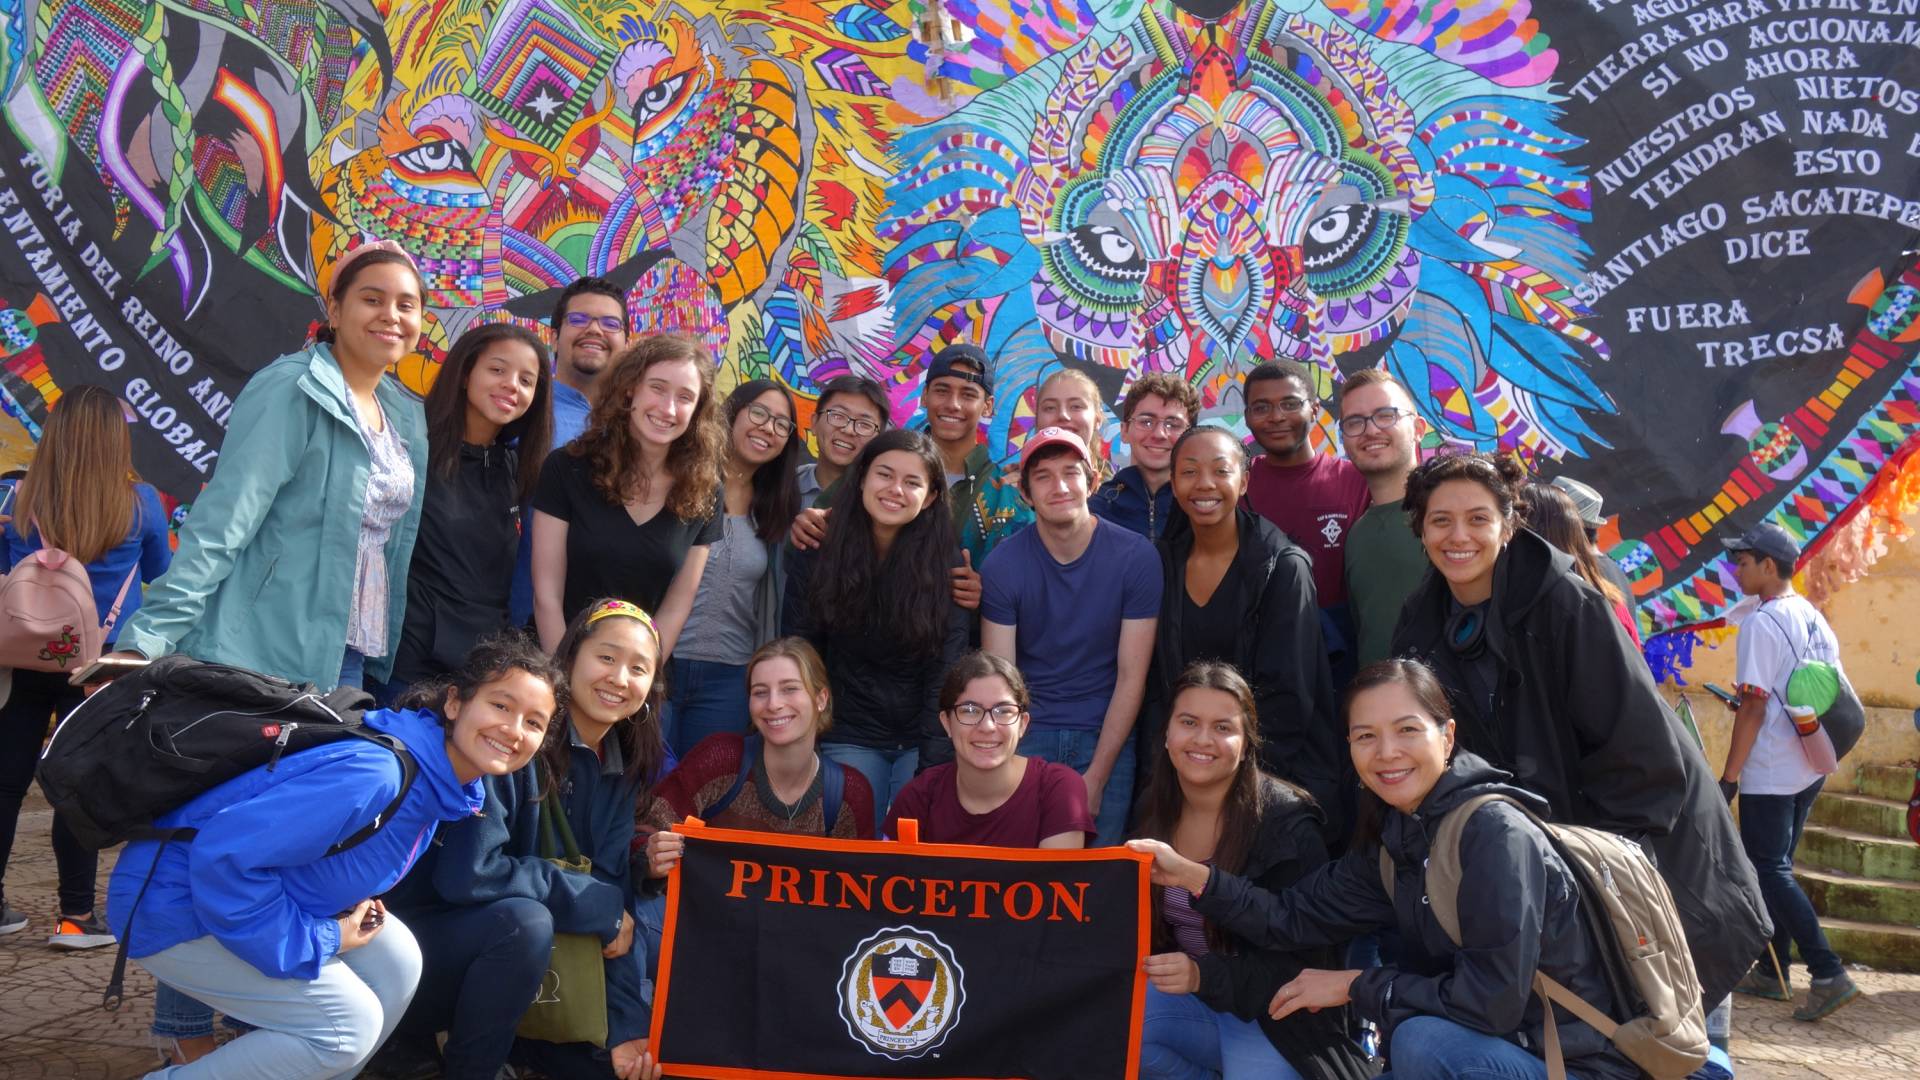 Students stand in front of an elaborately decorated kite while holding a Princeton University banner